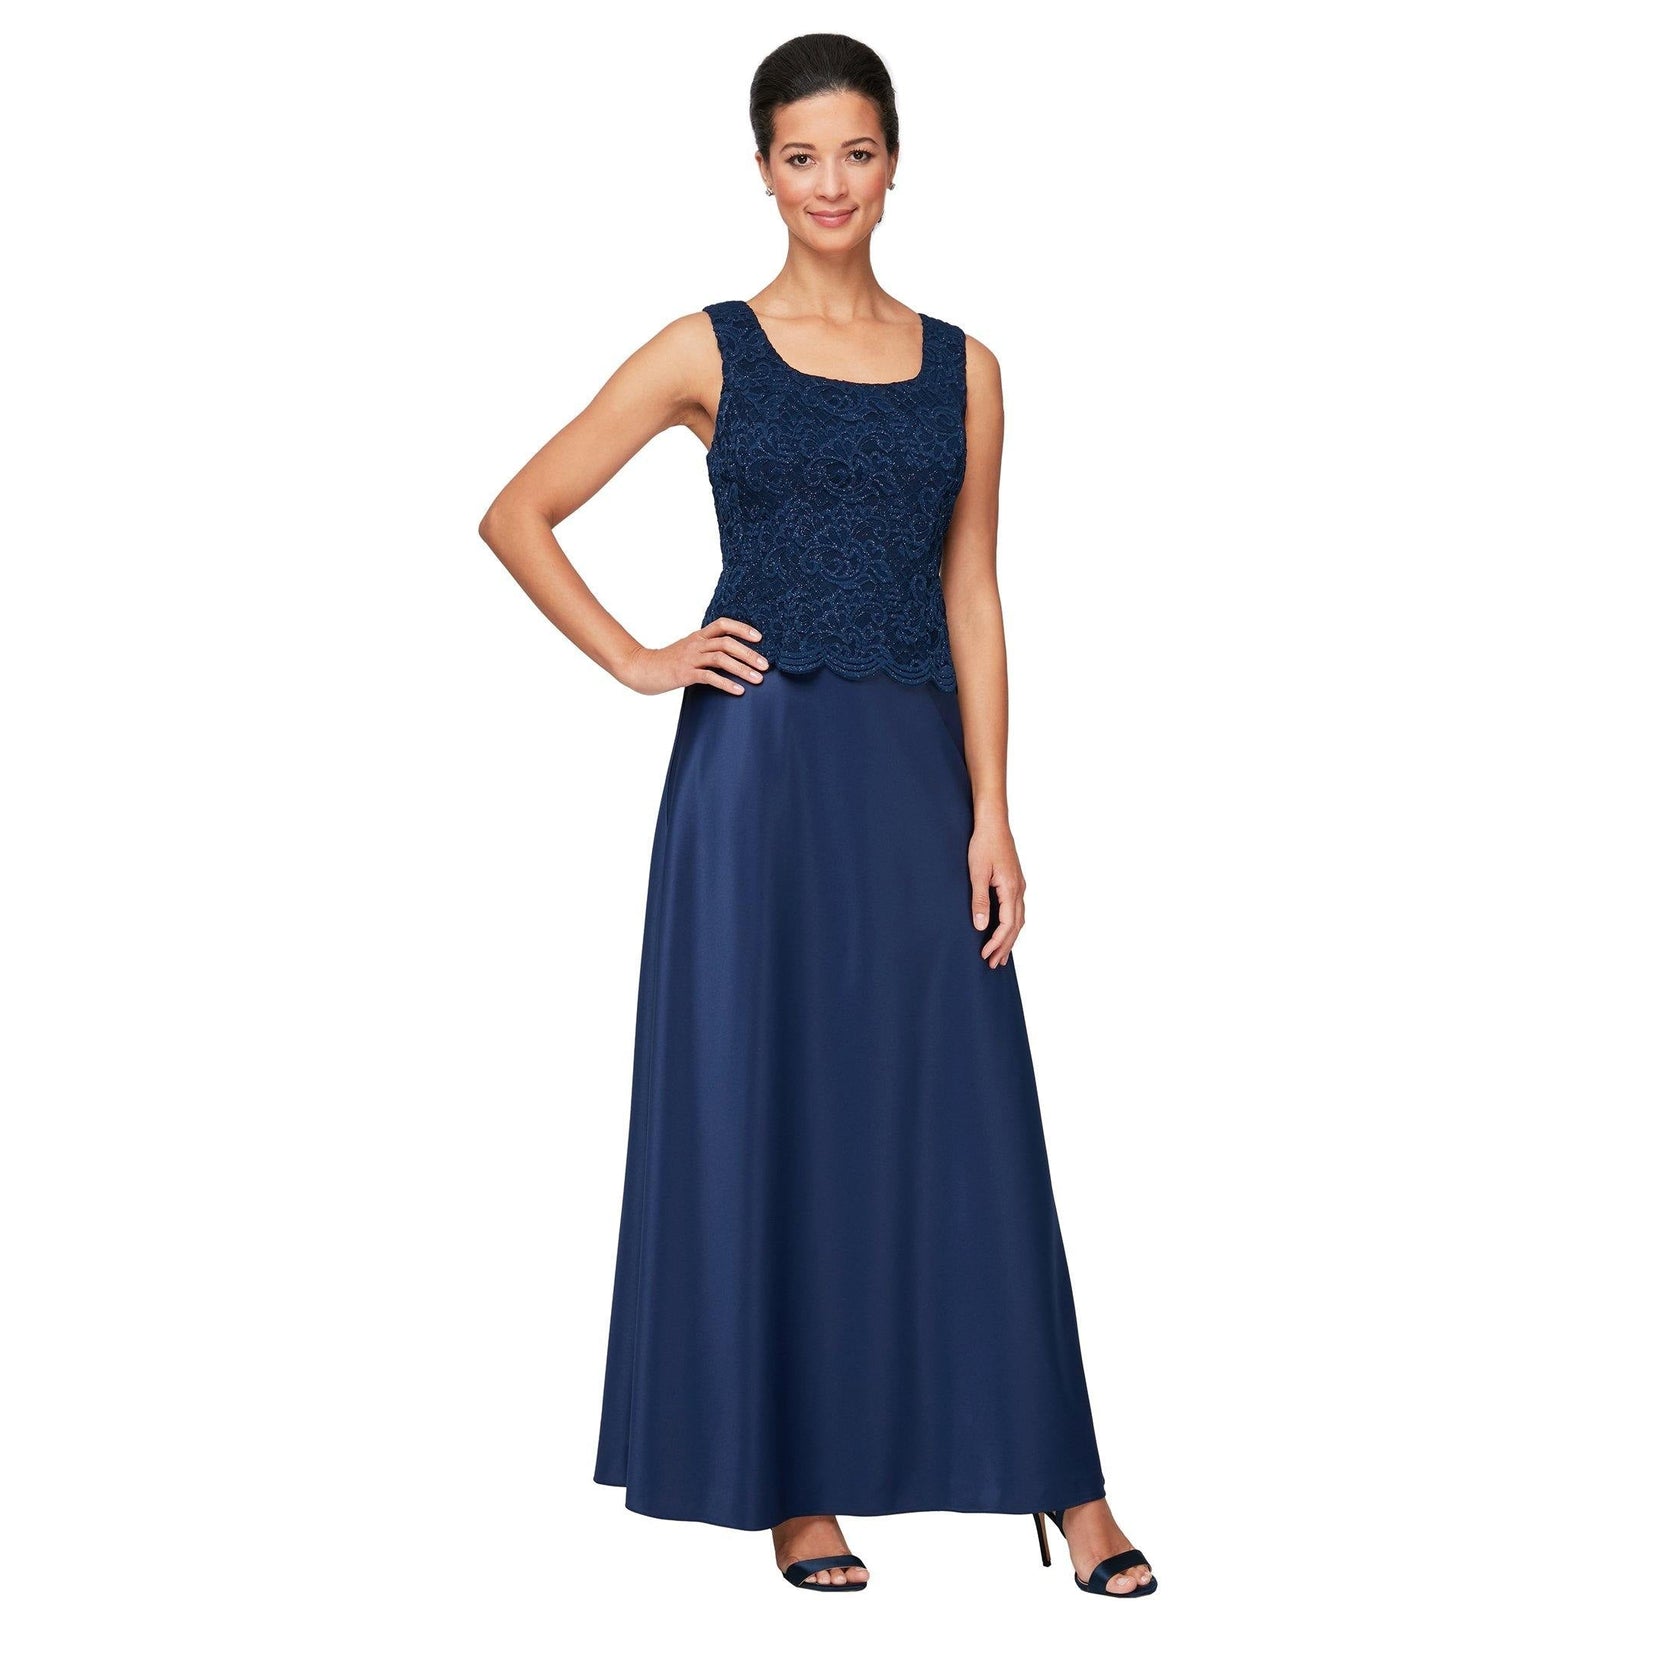 Navy Alex Evenings AE81122326 Long Formal Jacket Dress for $219.99 ...